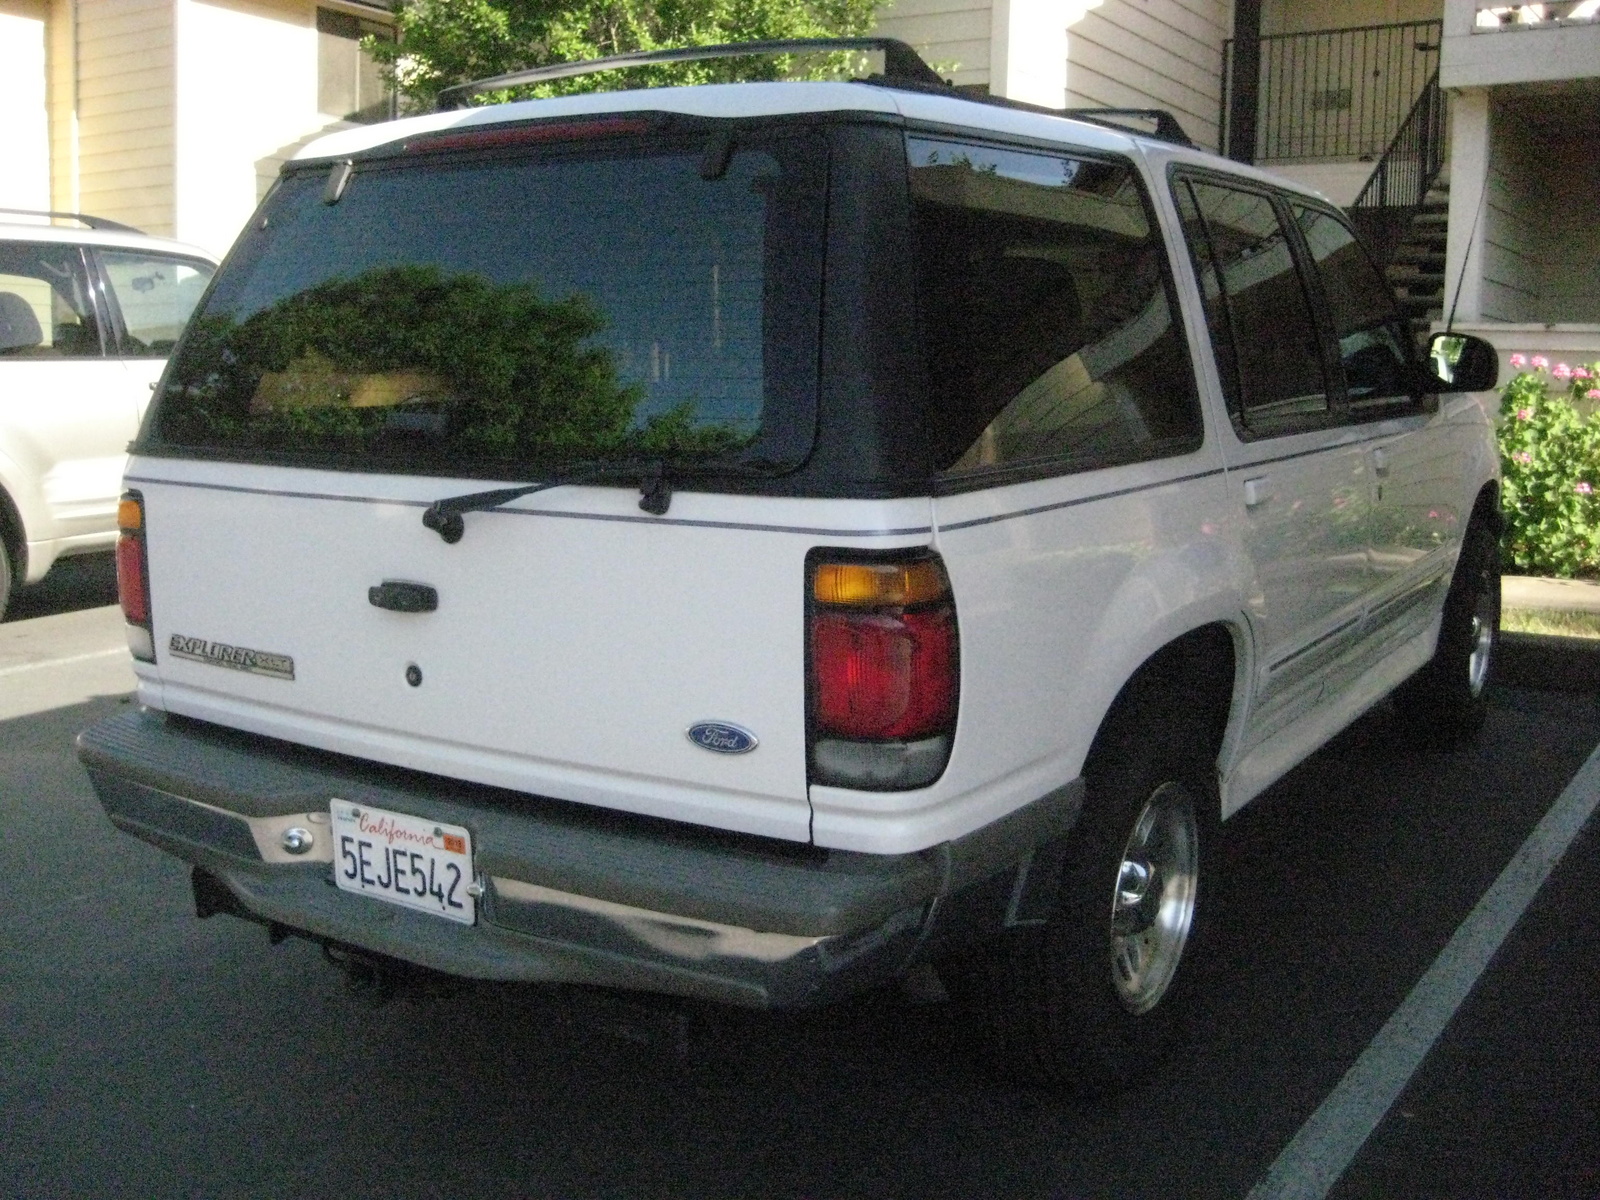 95 Ford explorer limited edition #1